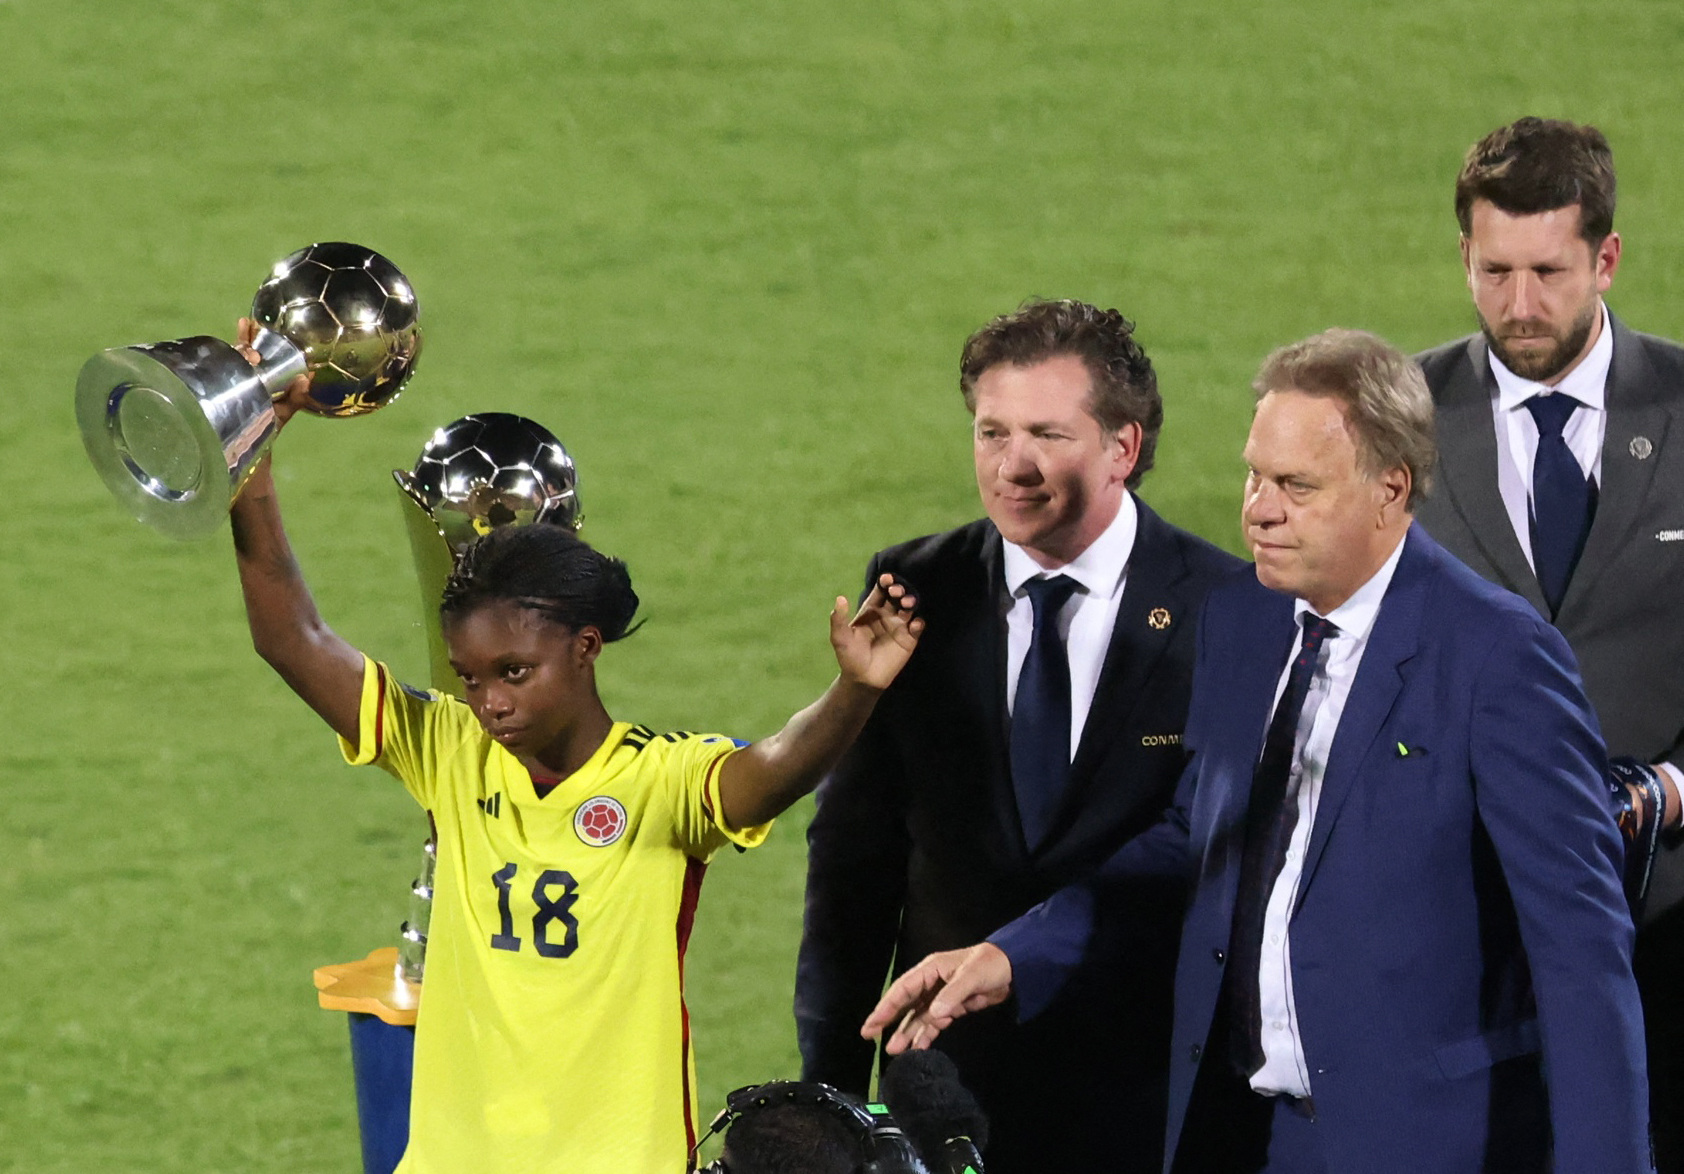 Soccer Football - Women's Copa America - Final - Colombia v Brazil - Estadio Alfonso Lopez, Bucaramanga, Colombia - July 30, 2022 Colombia's Linda Caicedo poses with the player of the tournament trophy alongside CONMEBOL president Alejandro Dominguez REUTERS/Luisa Gonzalez